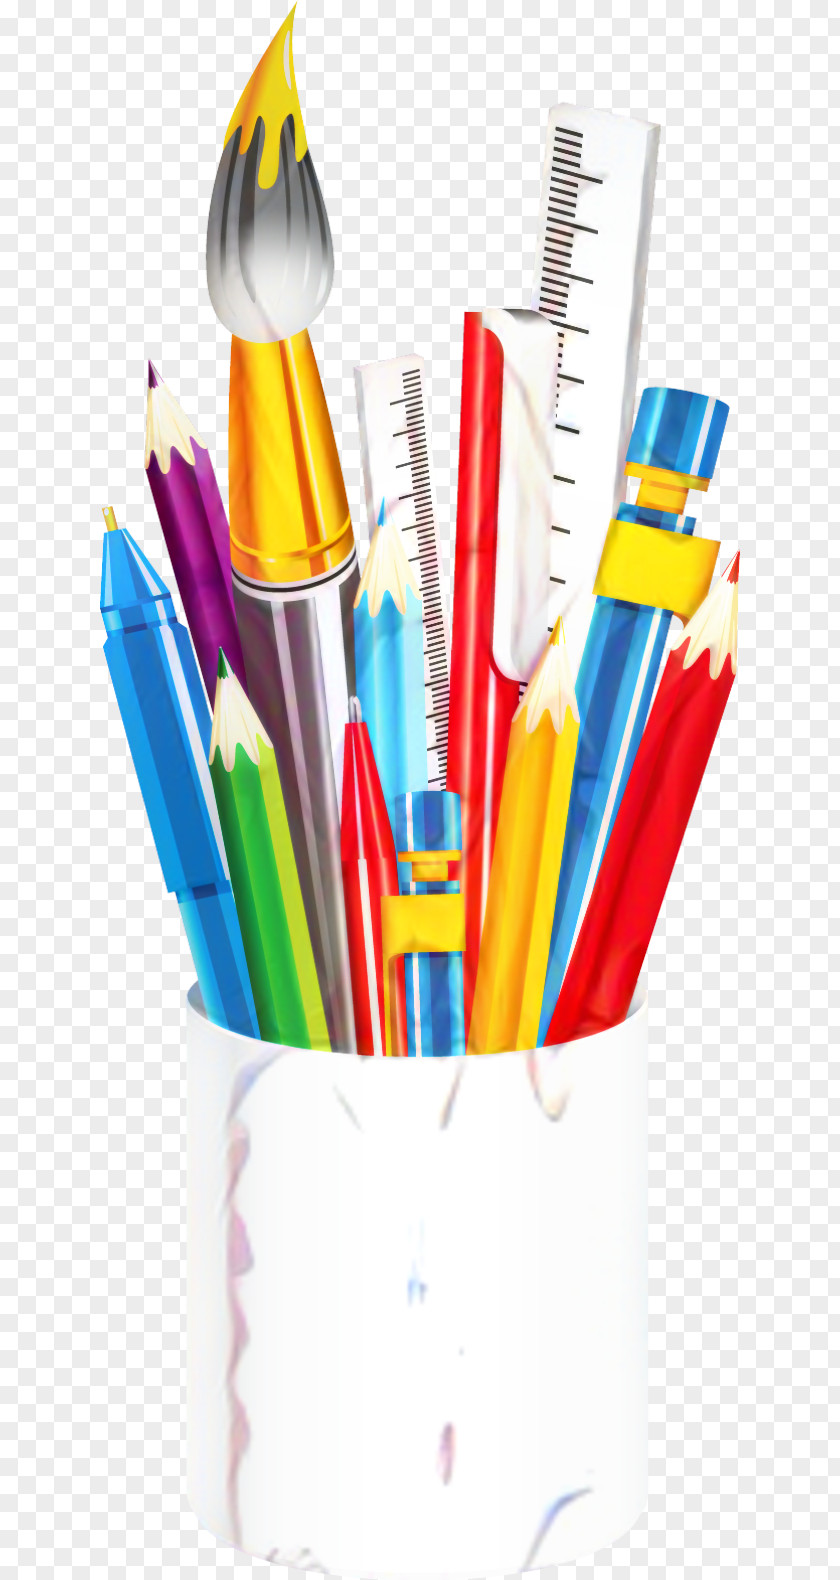 Pencil Writing Implement Product Design PNG